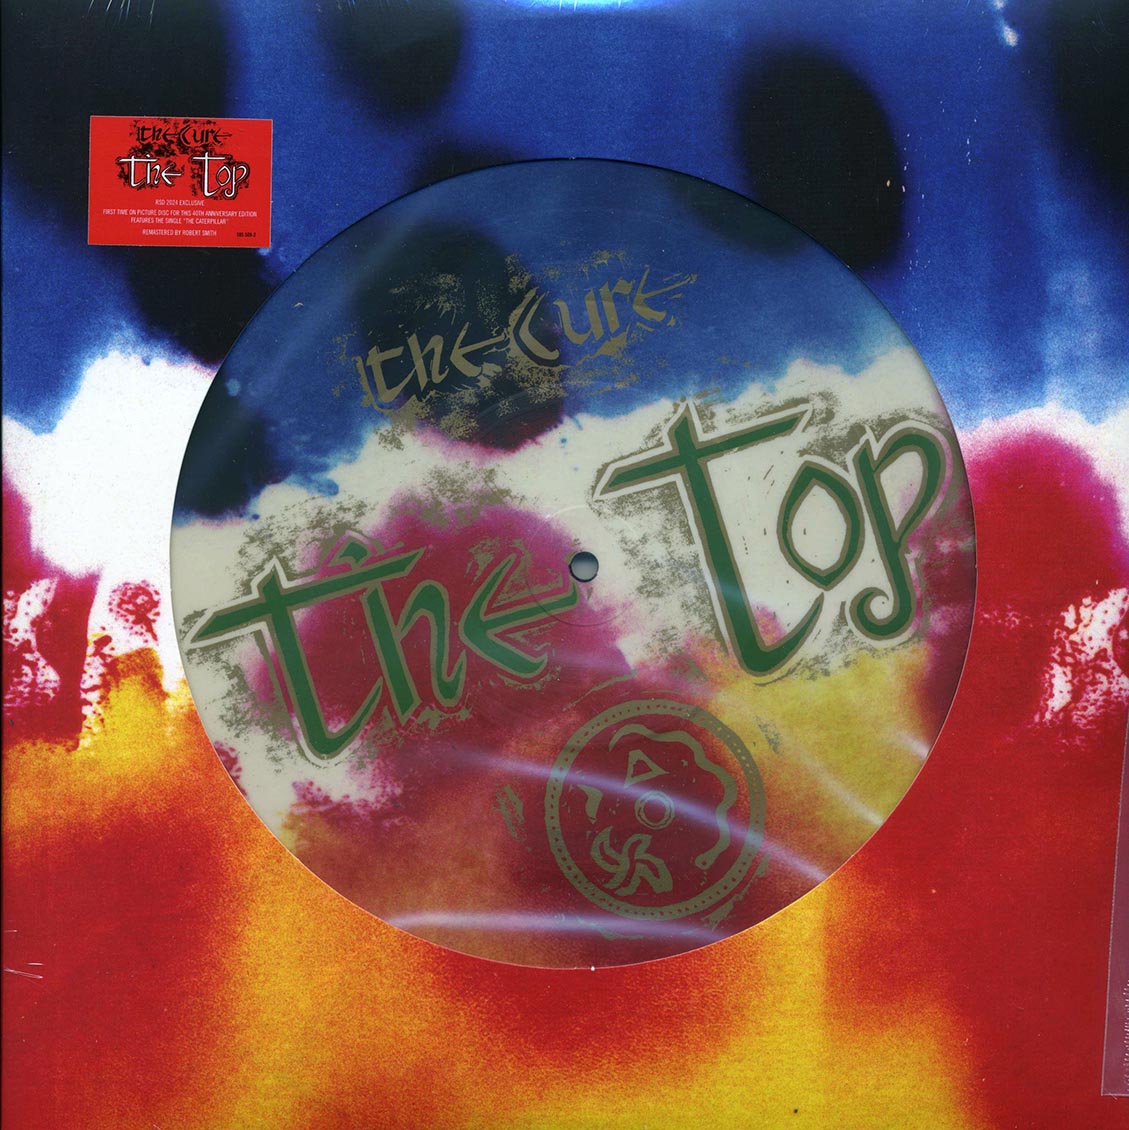 The Cure - The Top (40th Anniv. Ed.) (die-cut jacket) (RSD 2024) (ltd. ed.) (remastered) (picture disc) - Vinyl LP